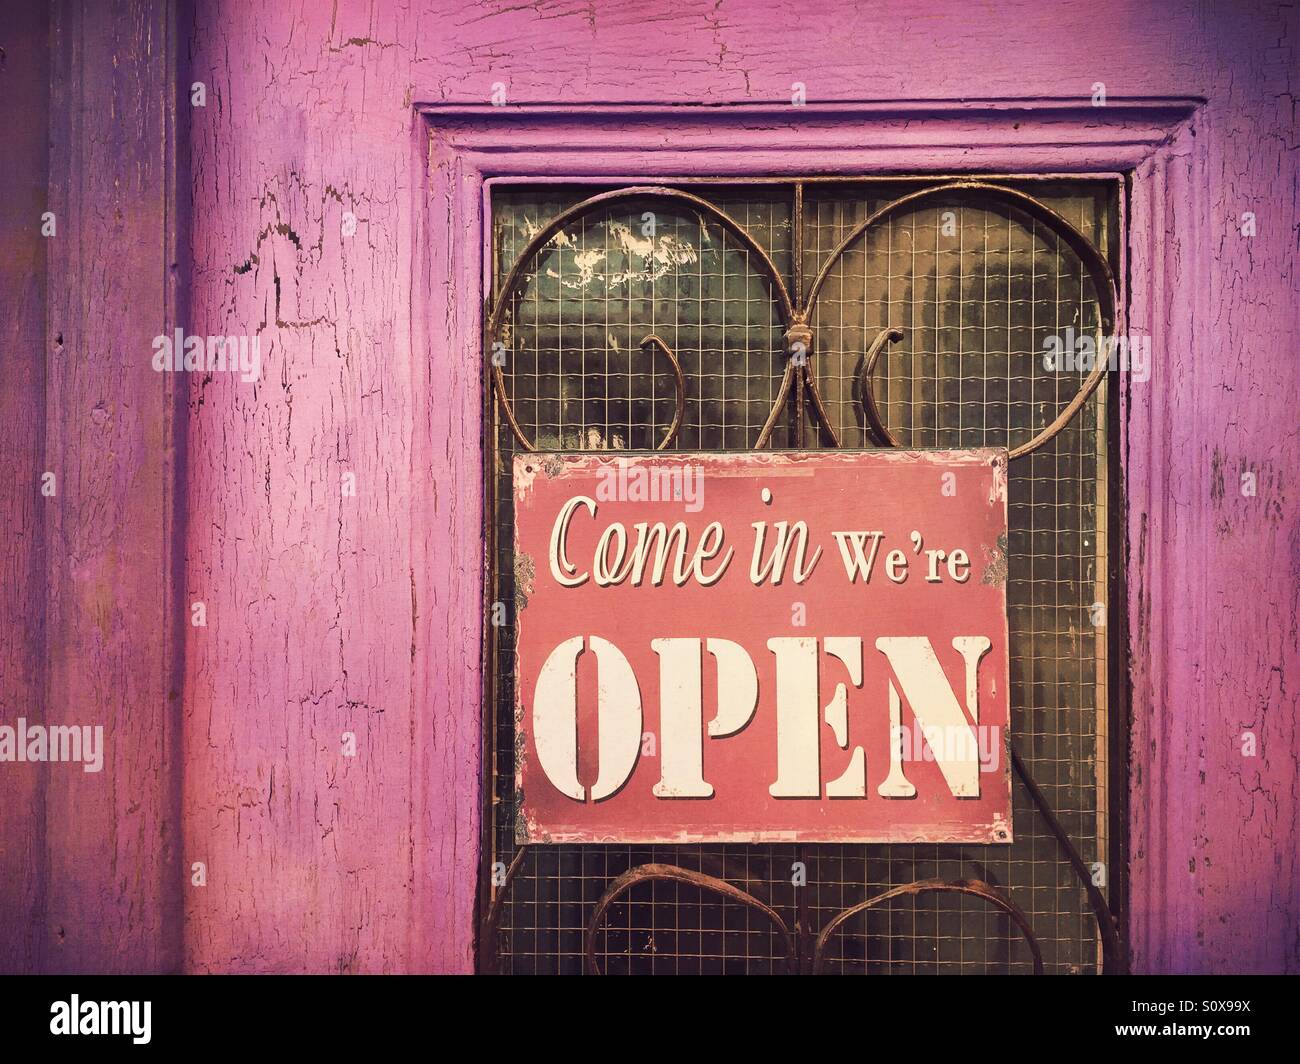 Come in we're open sign on an old wooden door Stock Photo